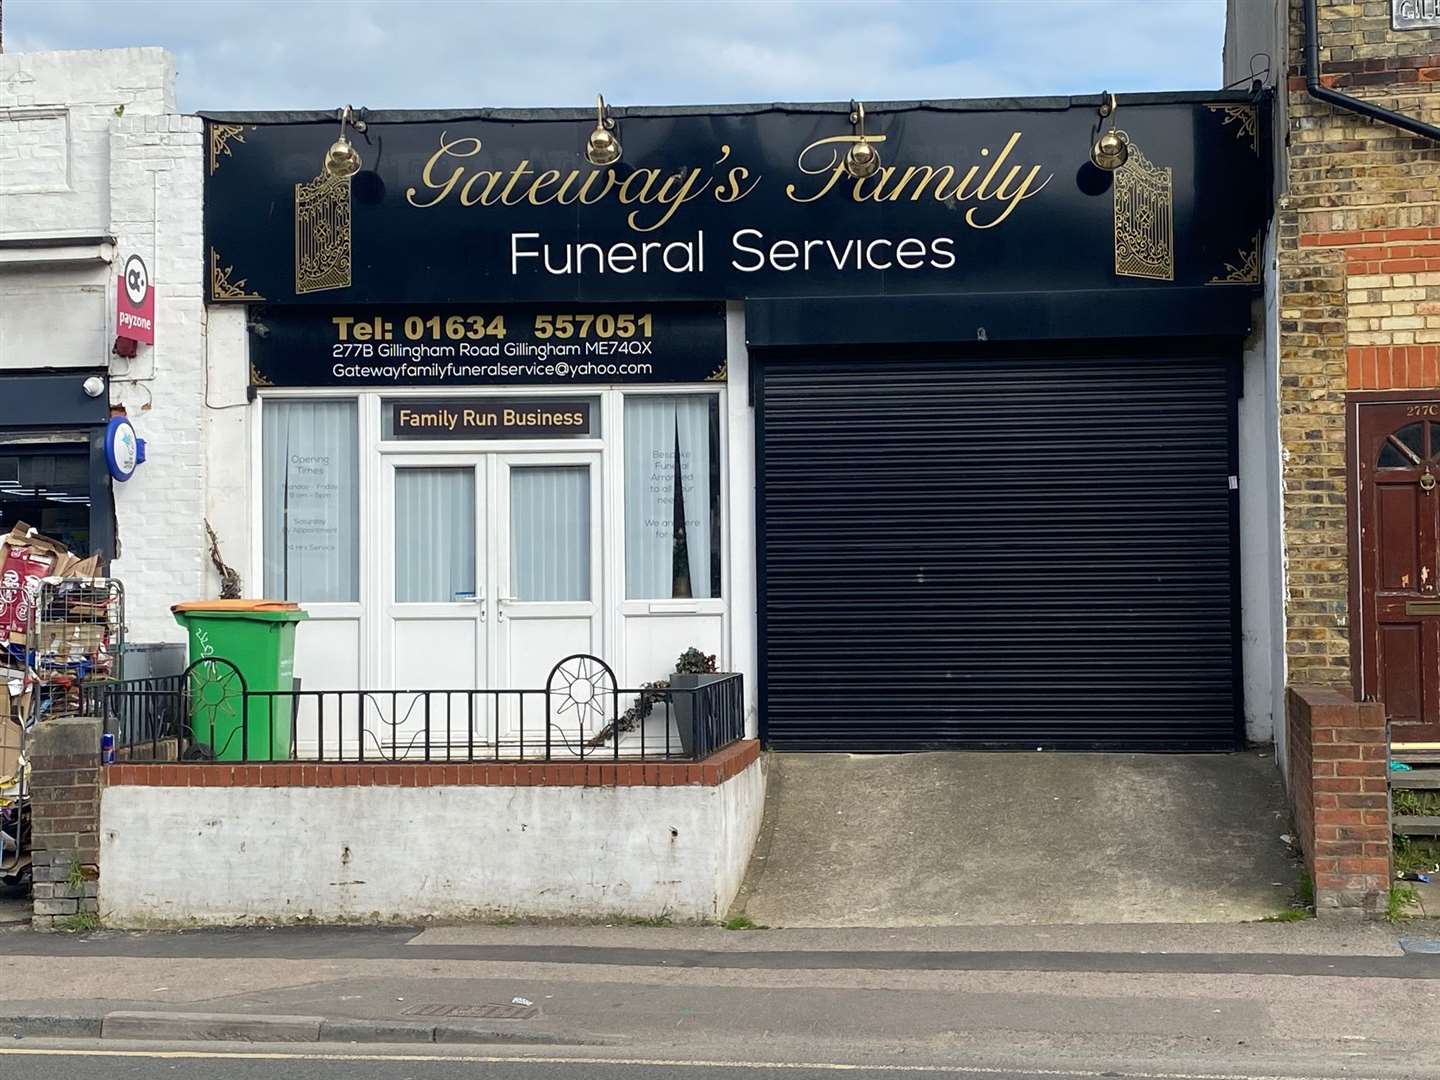 The funeral parlour in Gillingham